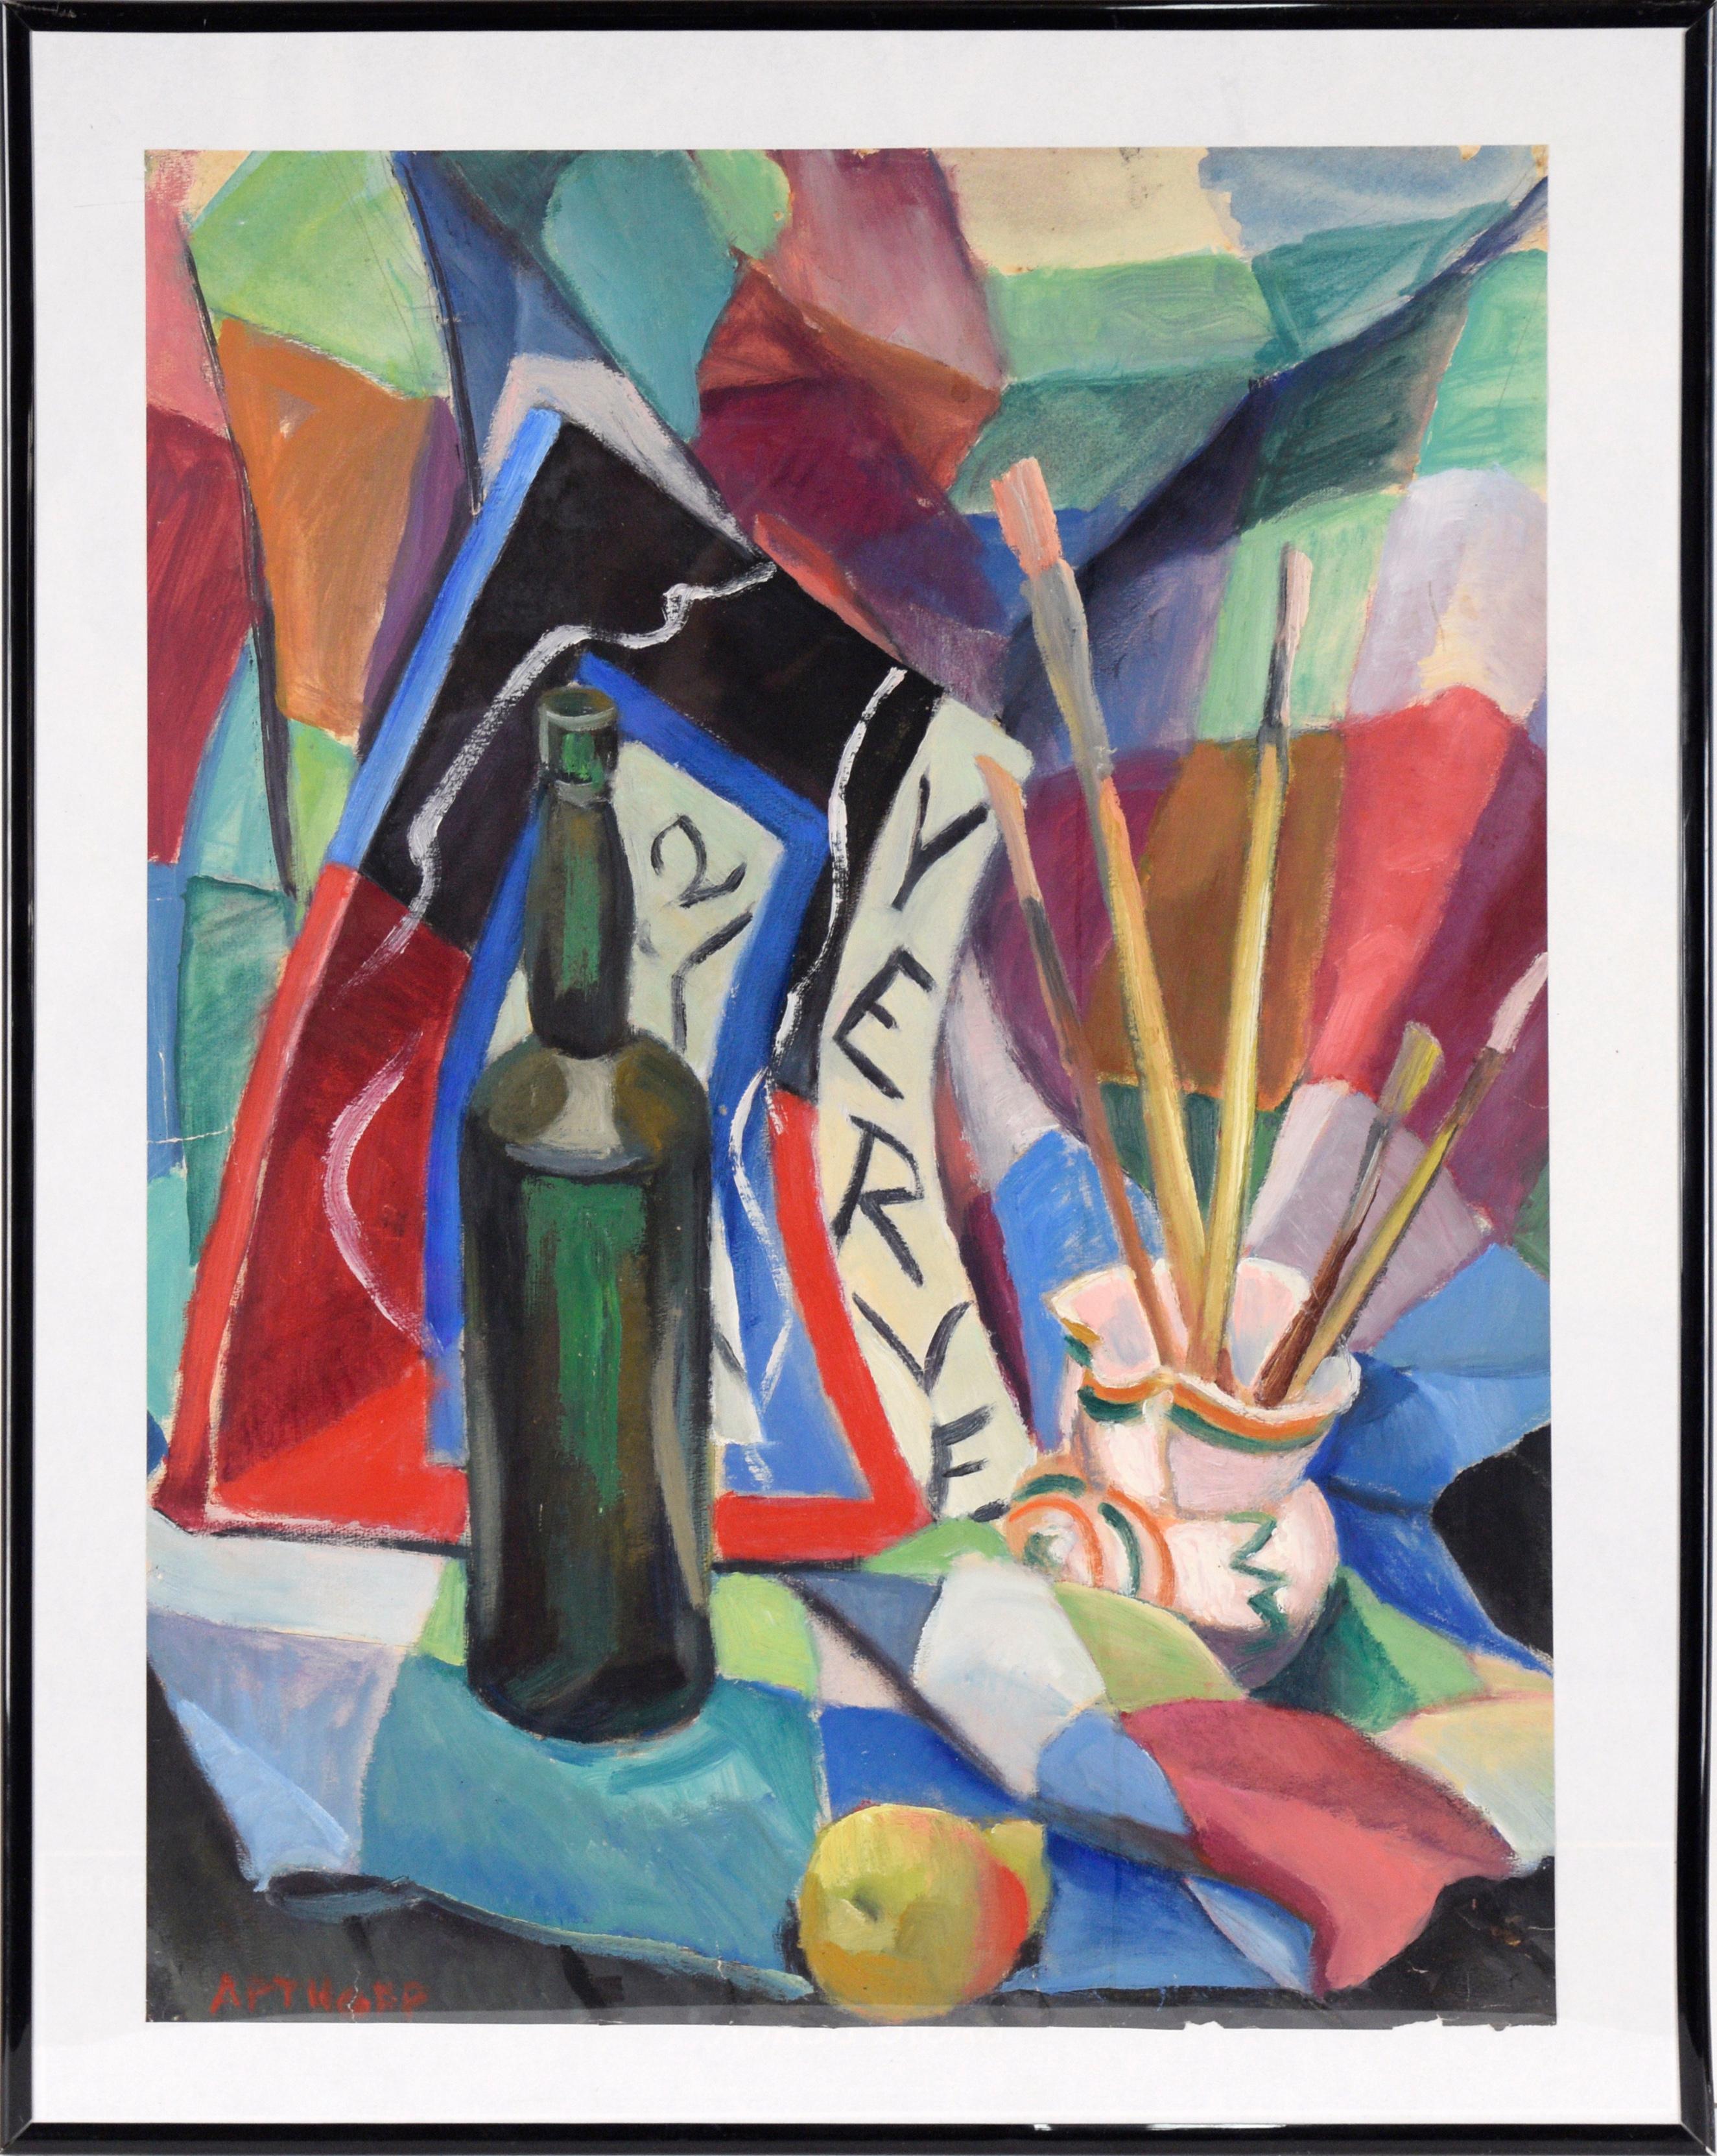 Still Life with Bottle, Paintbrushes, and Book in Oil on Paper